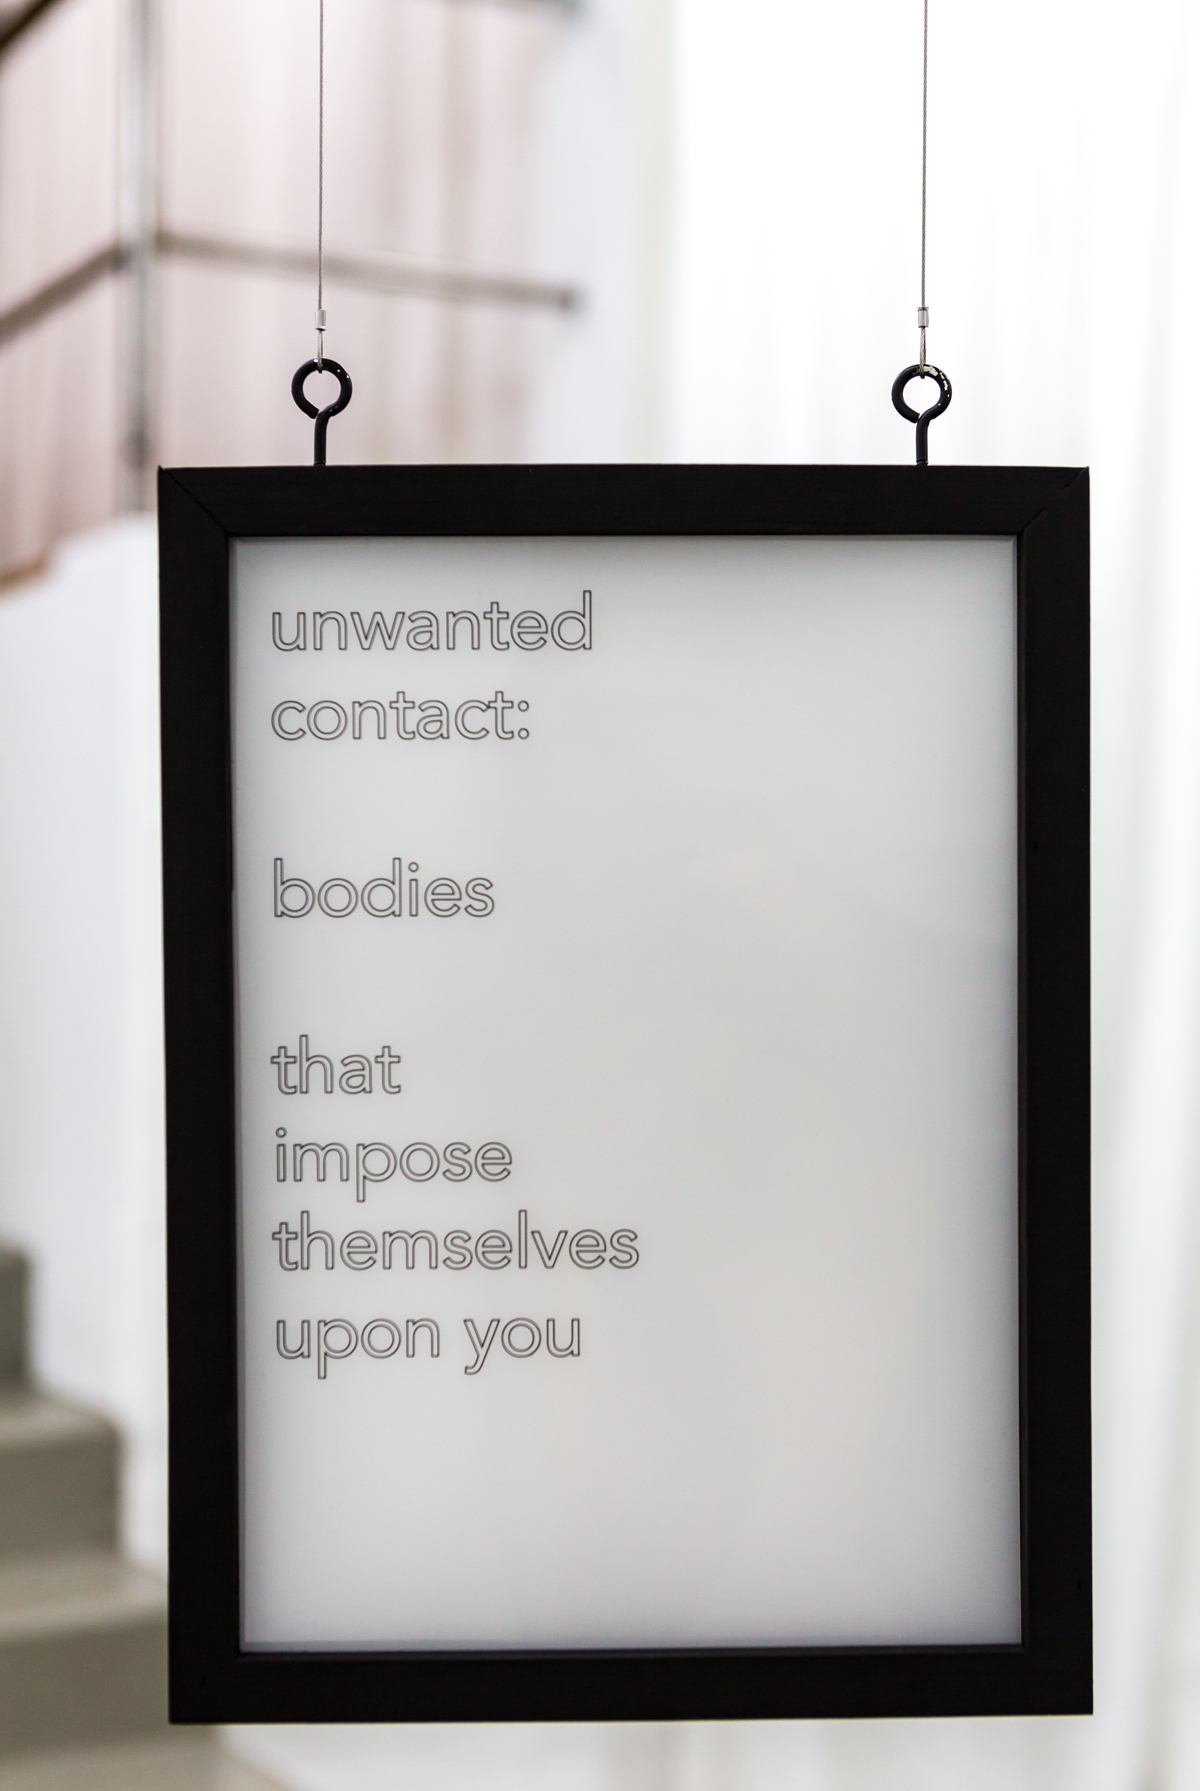 Sophie Hoyle, 'Unwanted Contact...'(2019), Drawing on acetate, wood, perspex, led lights, hanging wire